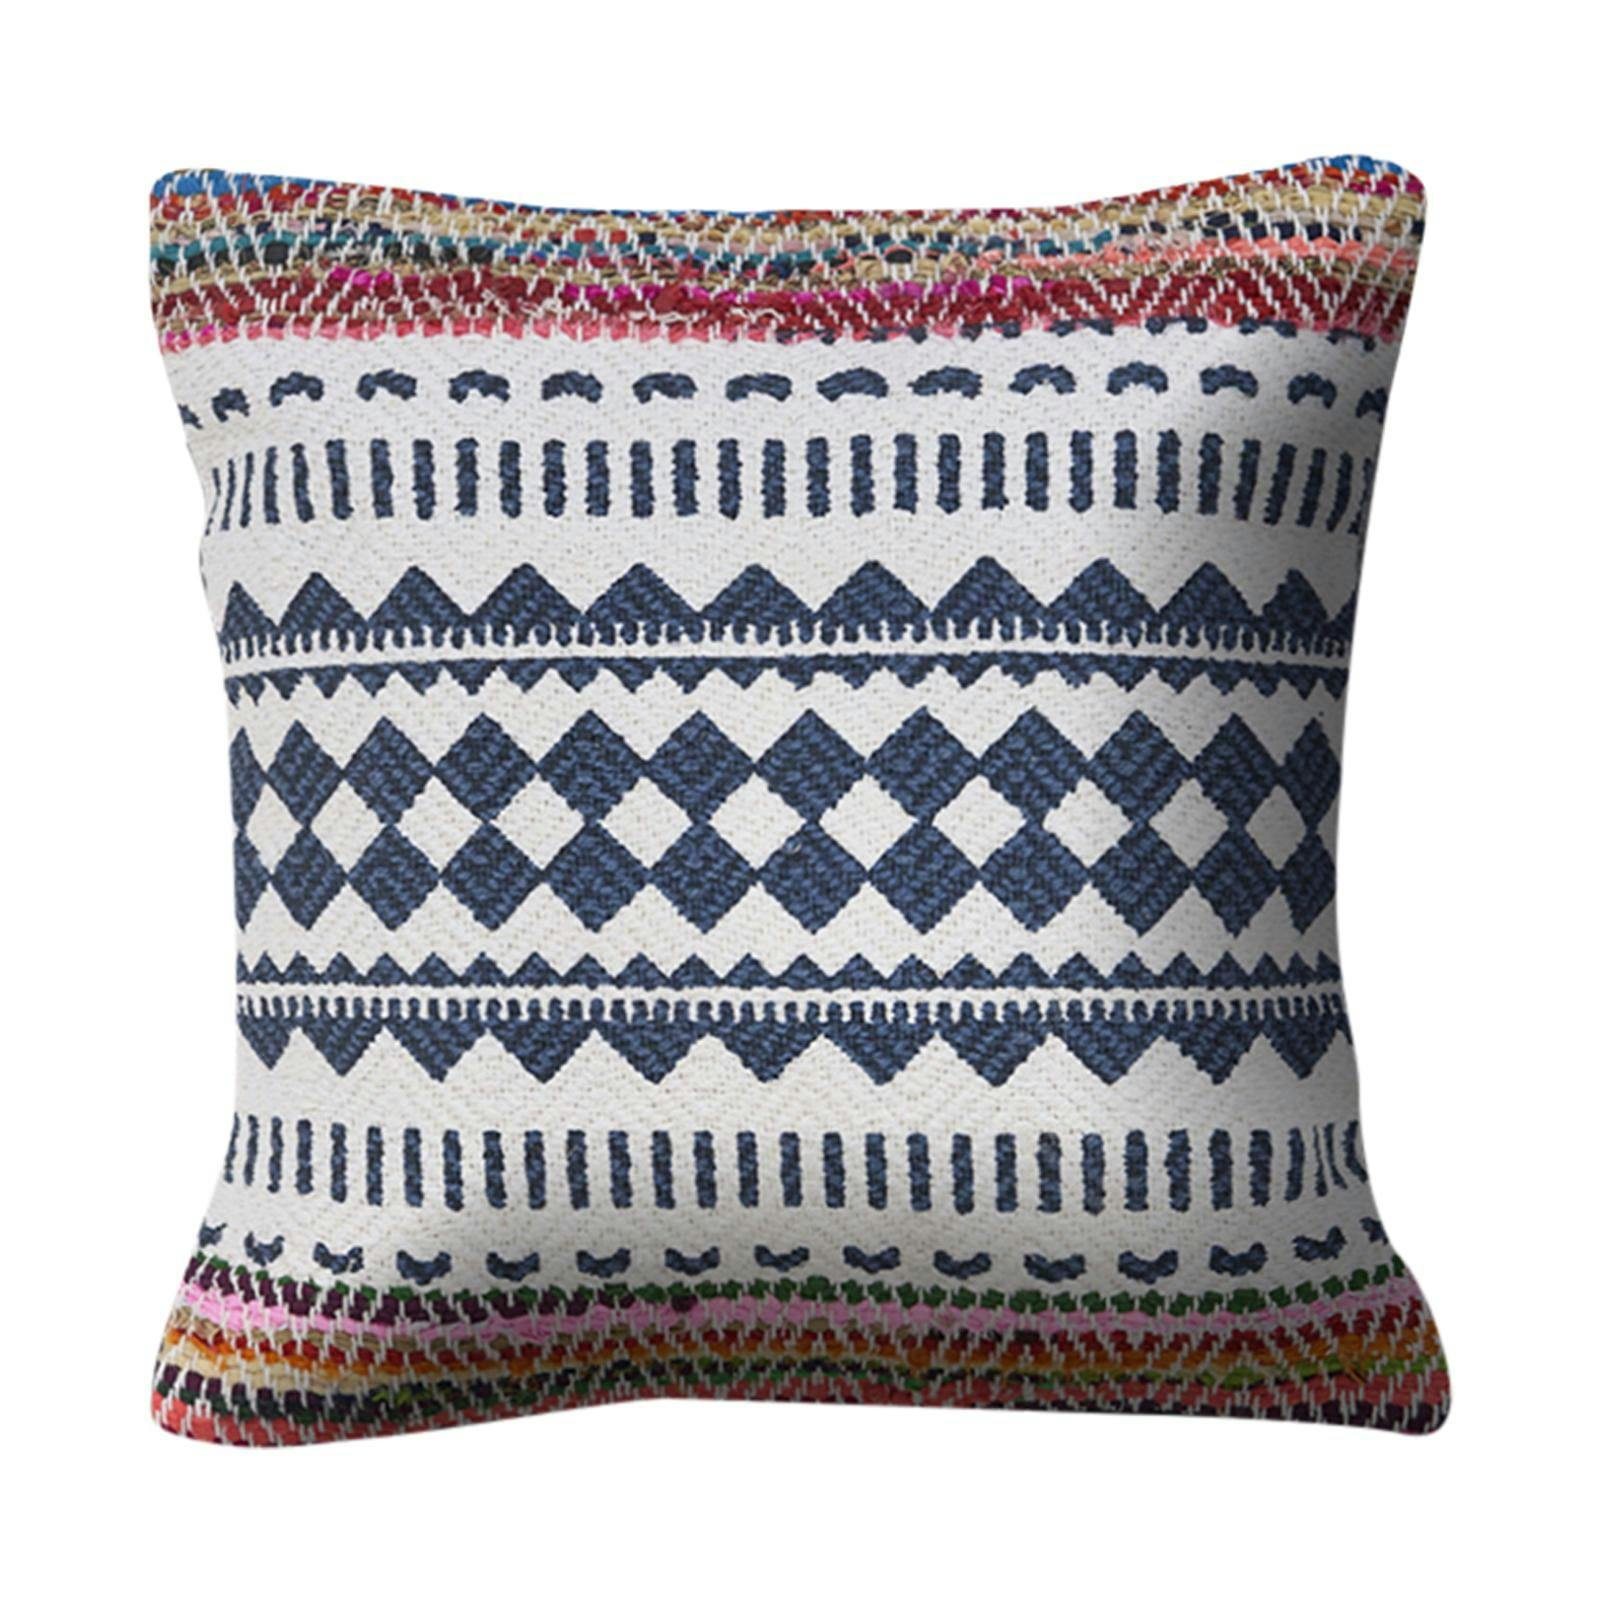 Eclectic Embroidered Bohemian Square Throw Pillow 18"x18"